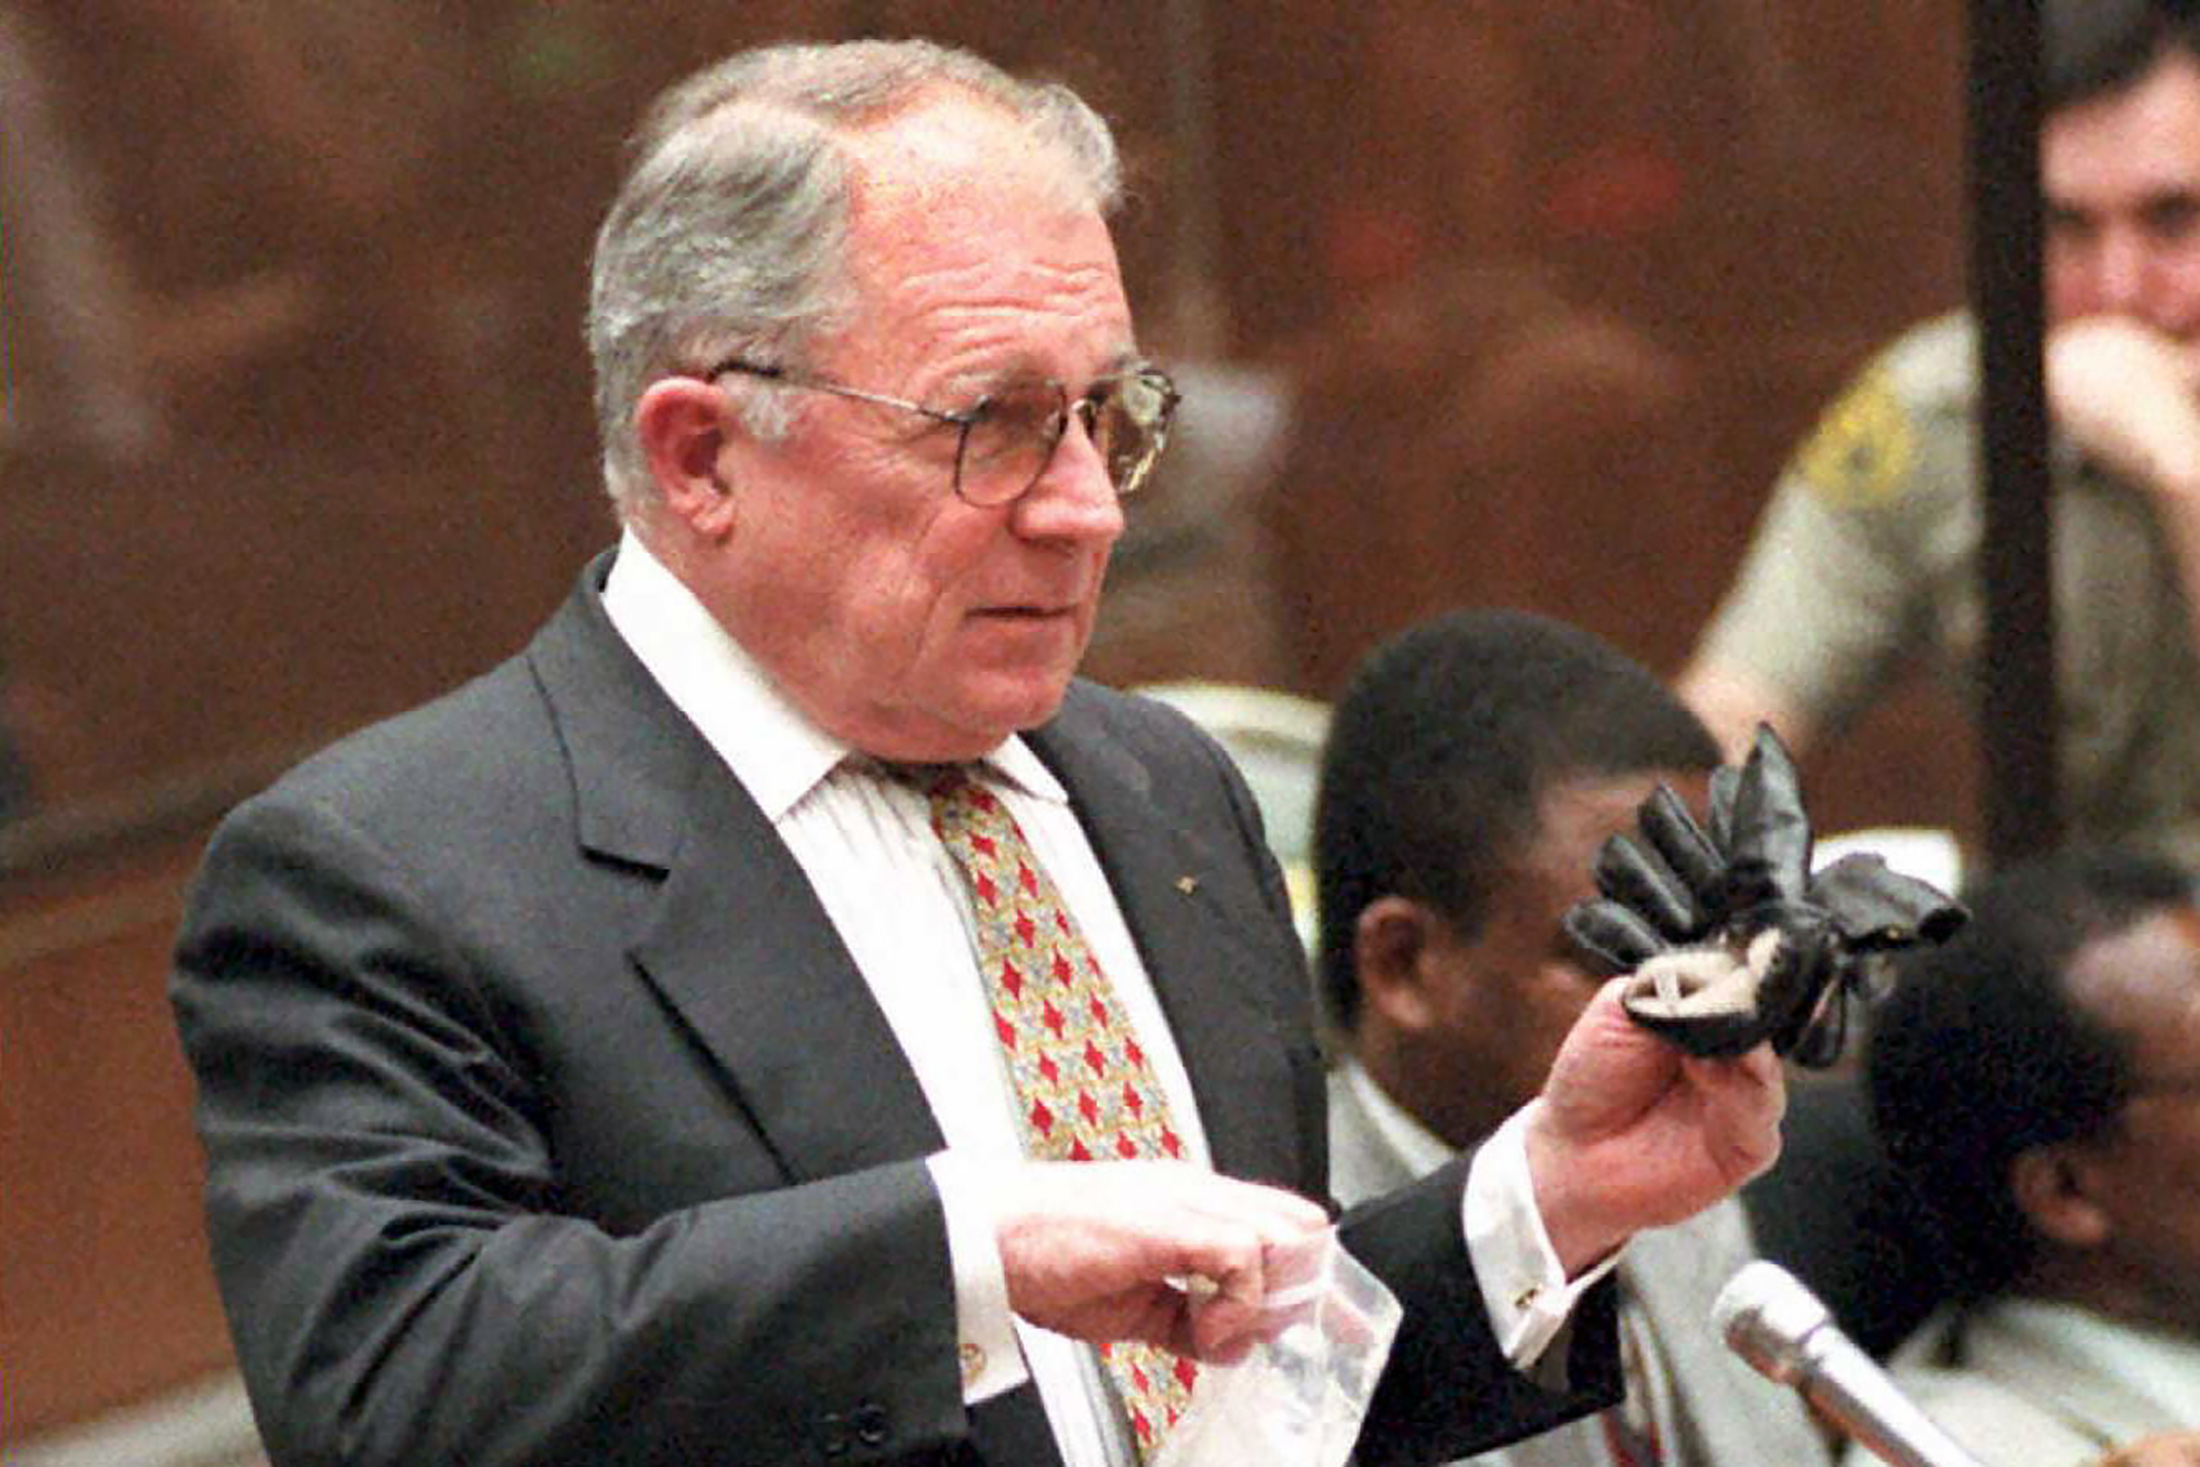 F. Lee Bailey, Defender of the Famous and Notorious, Dies at 87 - Bloomberg